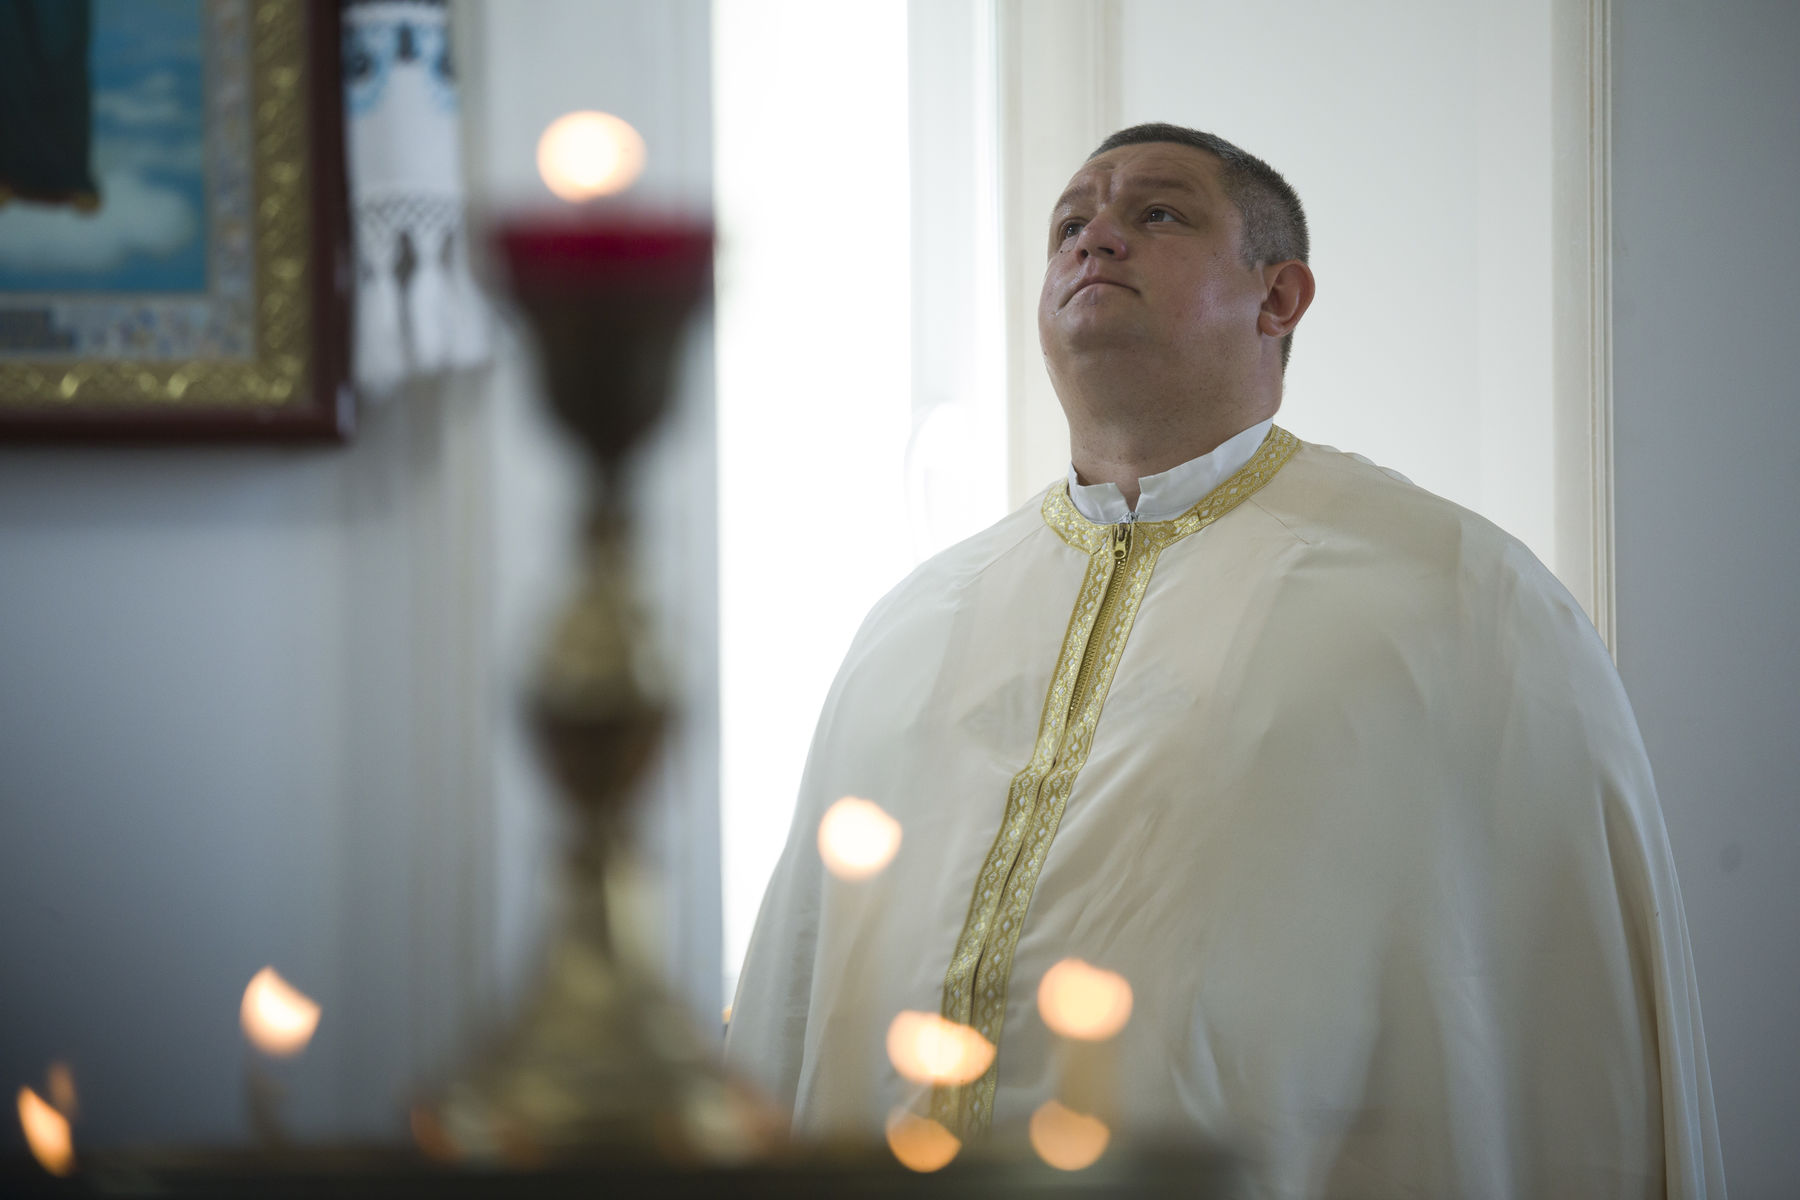 “Please pray for us amidst these difficult moments”: Father Oleksandr Bilskyi from Beryslav